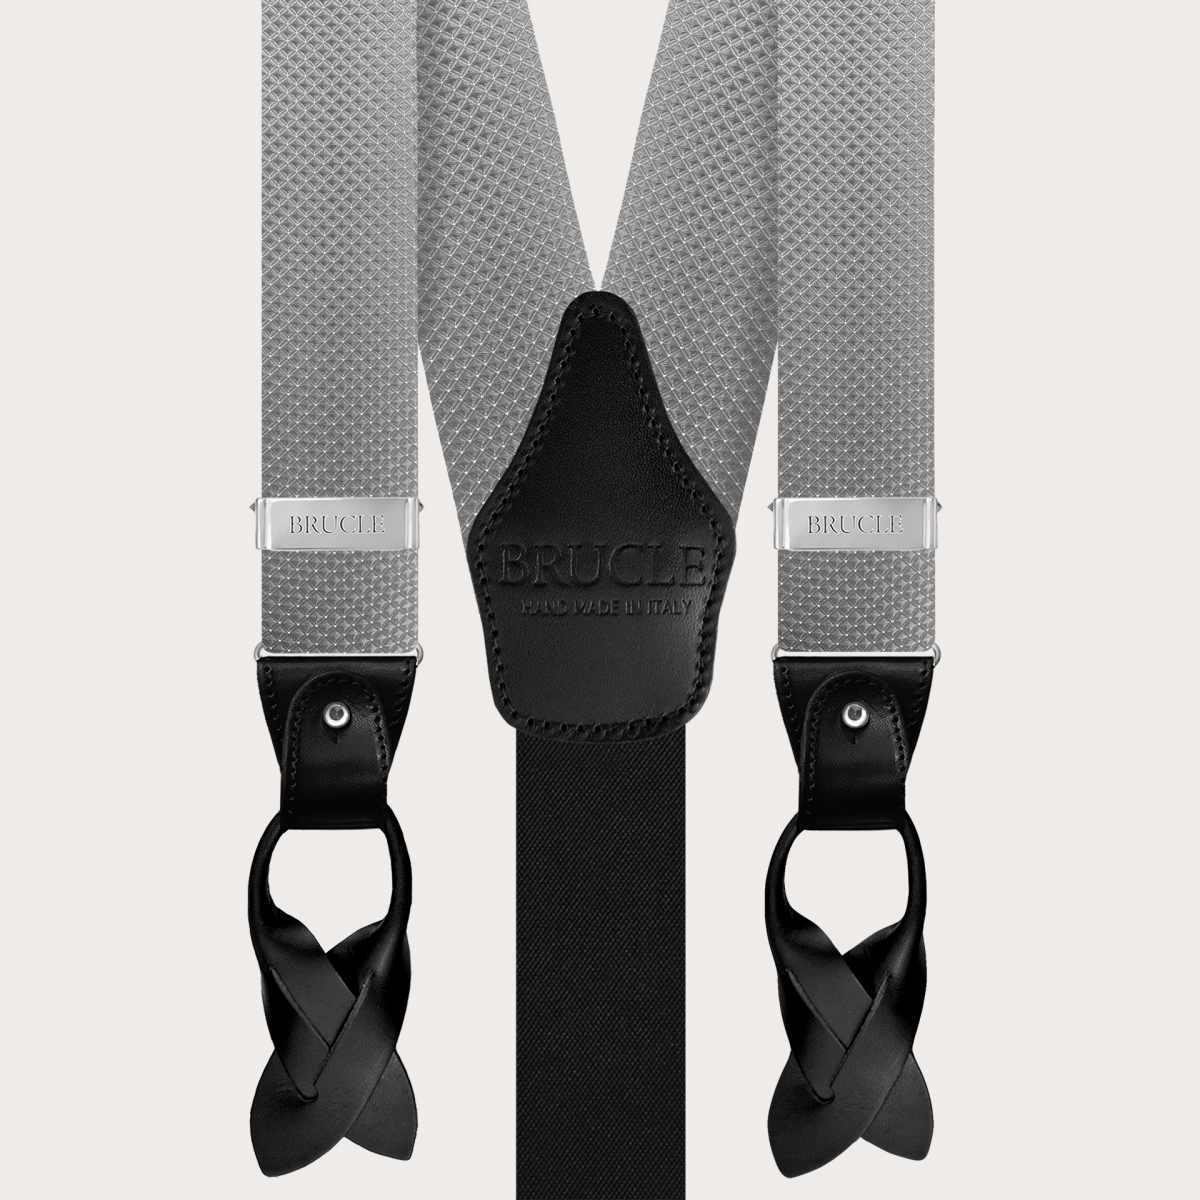 Formal Y-shape fabric suspenders in silk, dotted grey pattern